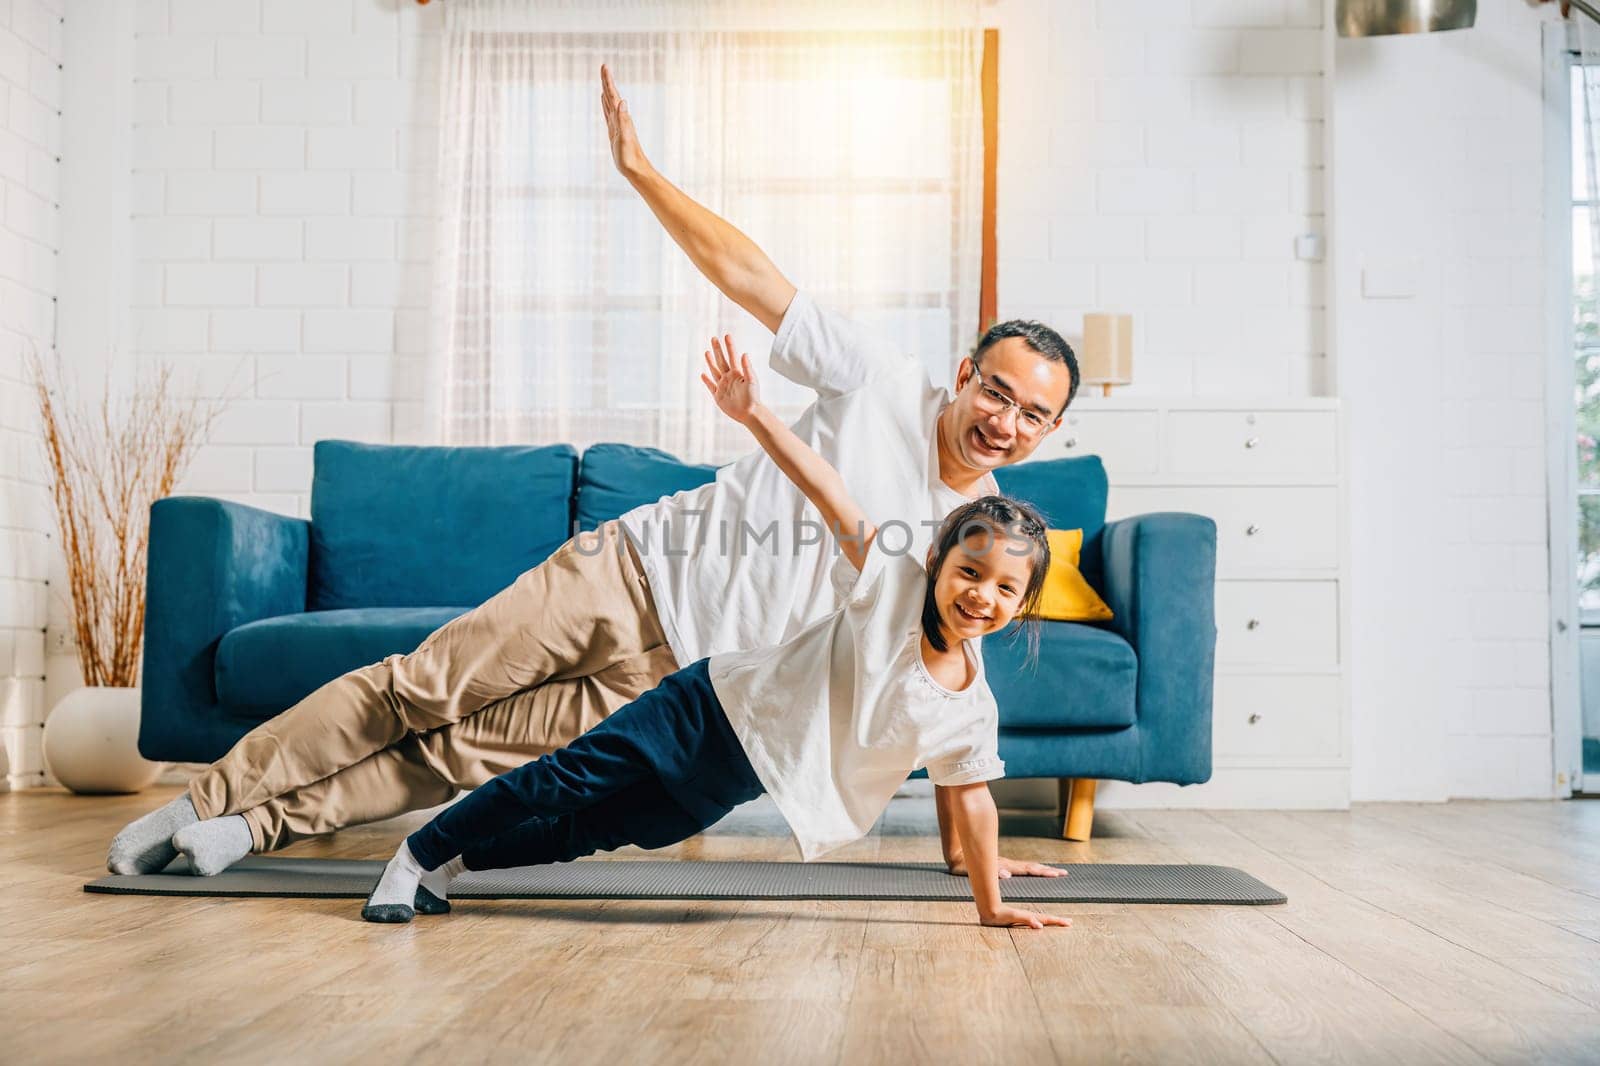 A father and his daughter create a harmonious family moment as they practice yoga at home emphasizing togetherness happiness and muscle strength their smiles radiating positivity.